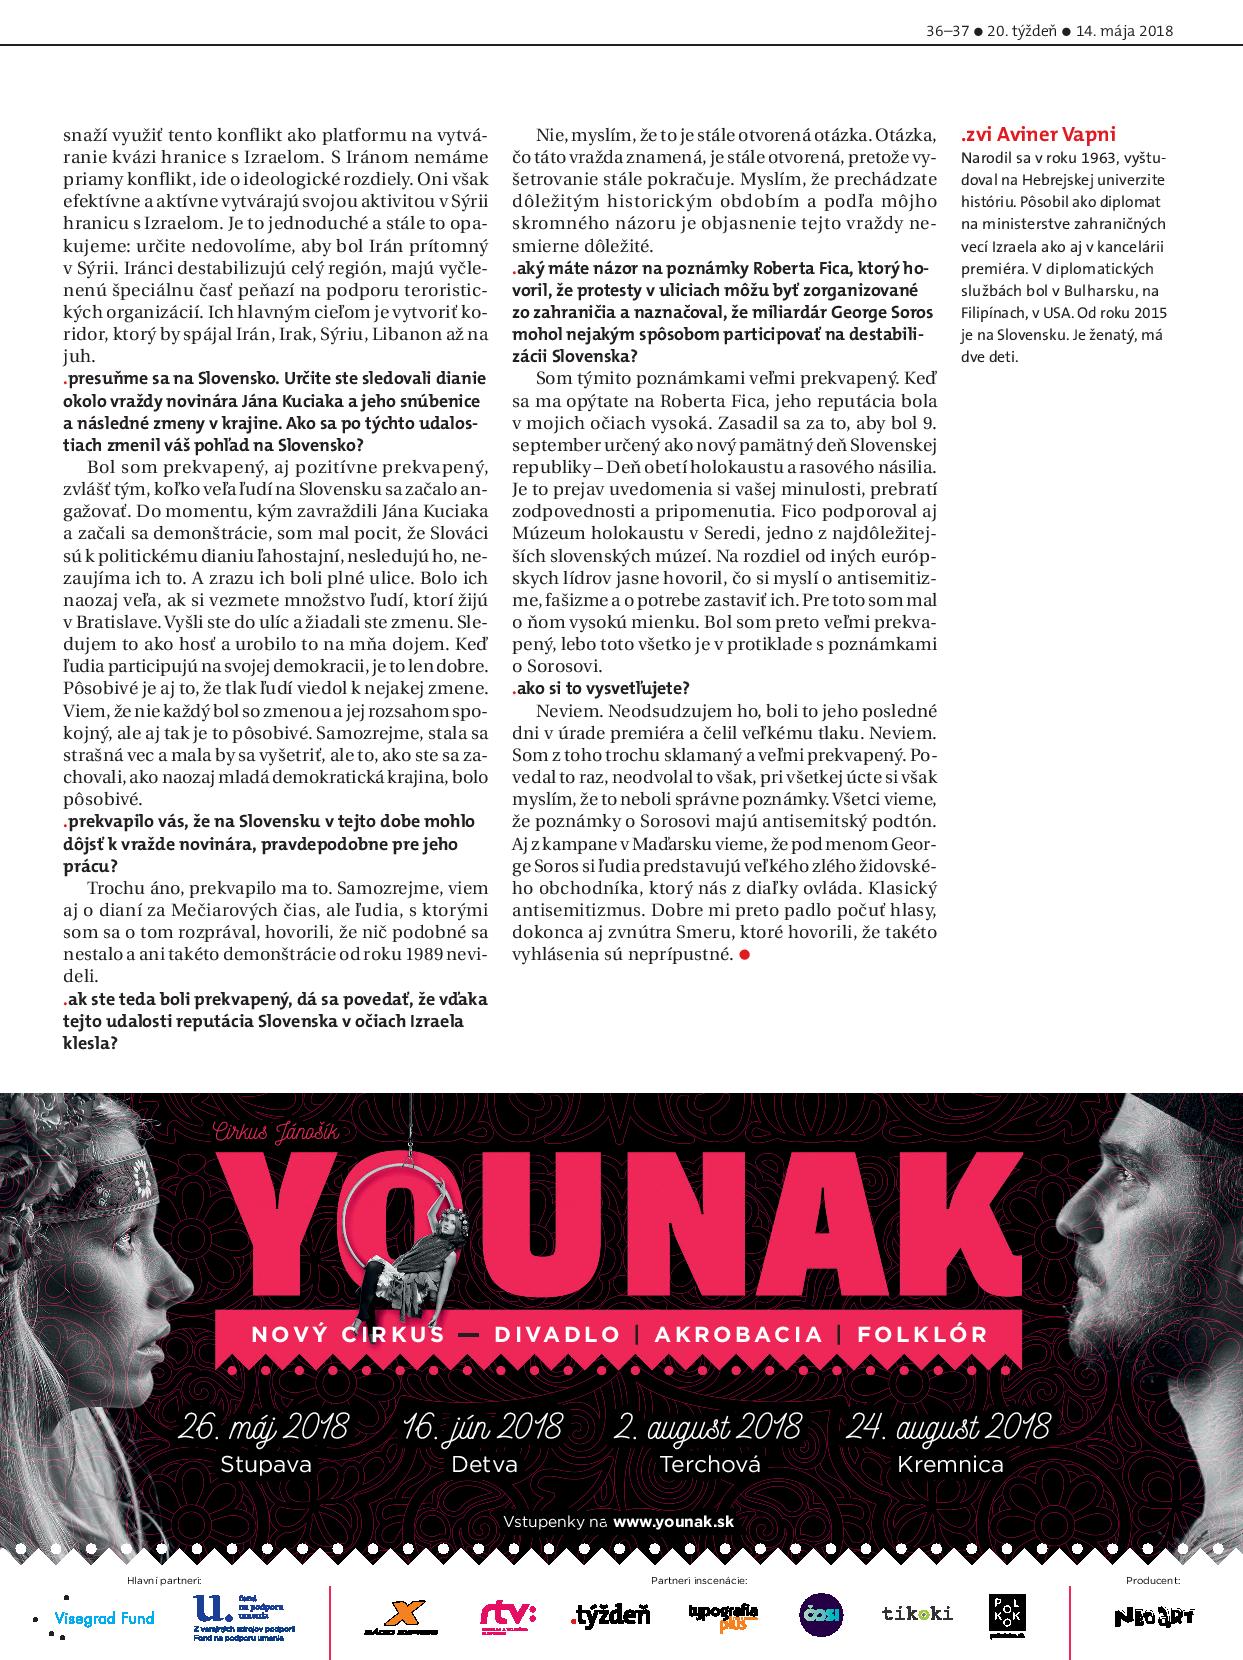 Amb. Zvi A. Vapni on Twitter: "The Slovak Weekly #Týždeň chose to publish interview on the exact 70th anniversary of the declaration of Israeli independence. Enjoy reading it...if you are fluent